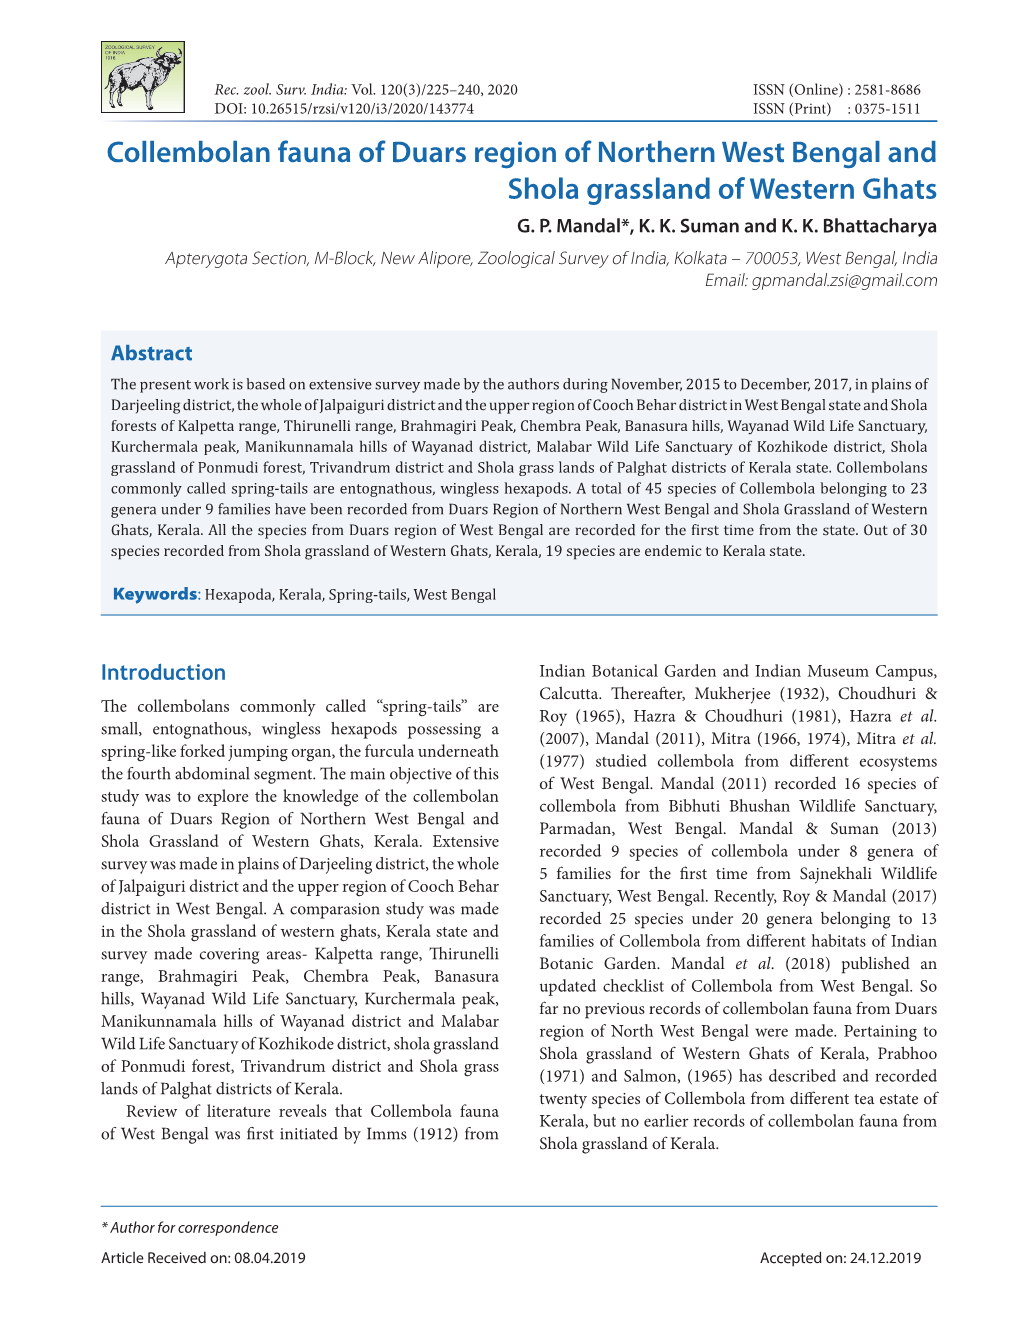 Collembolan Fauna of Duars Region of Northern West Bengal and Shola Grassland of Western Ghats G